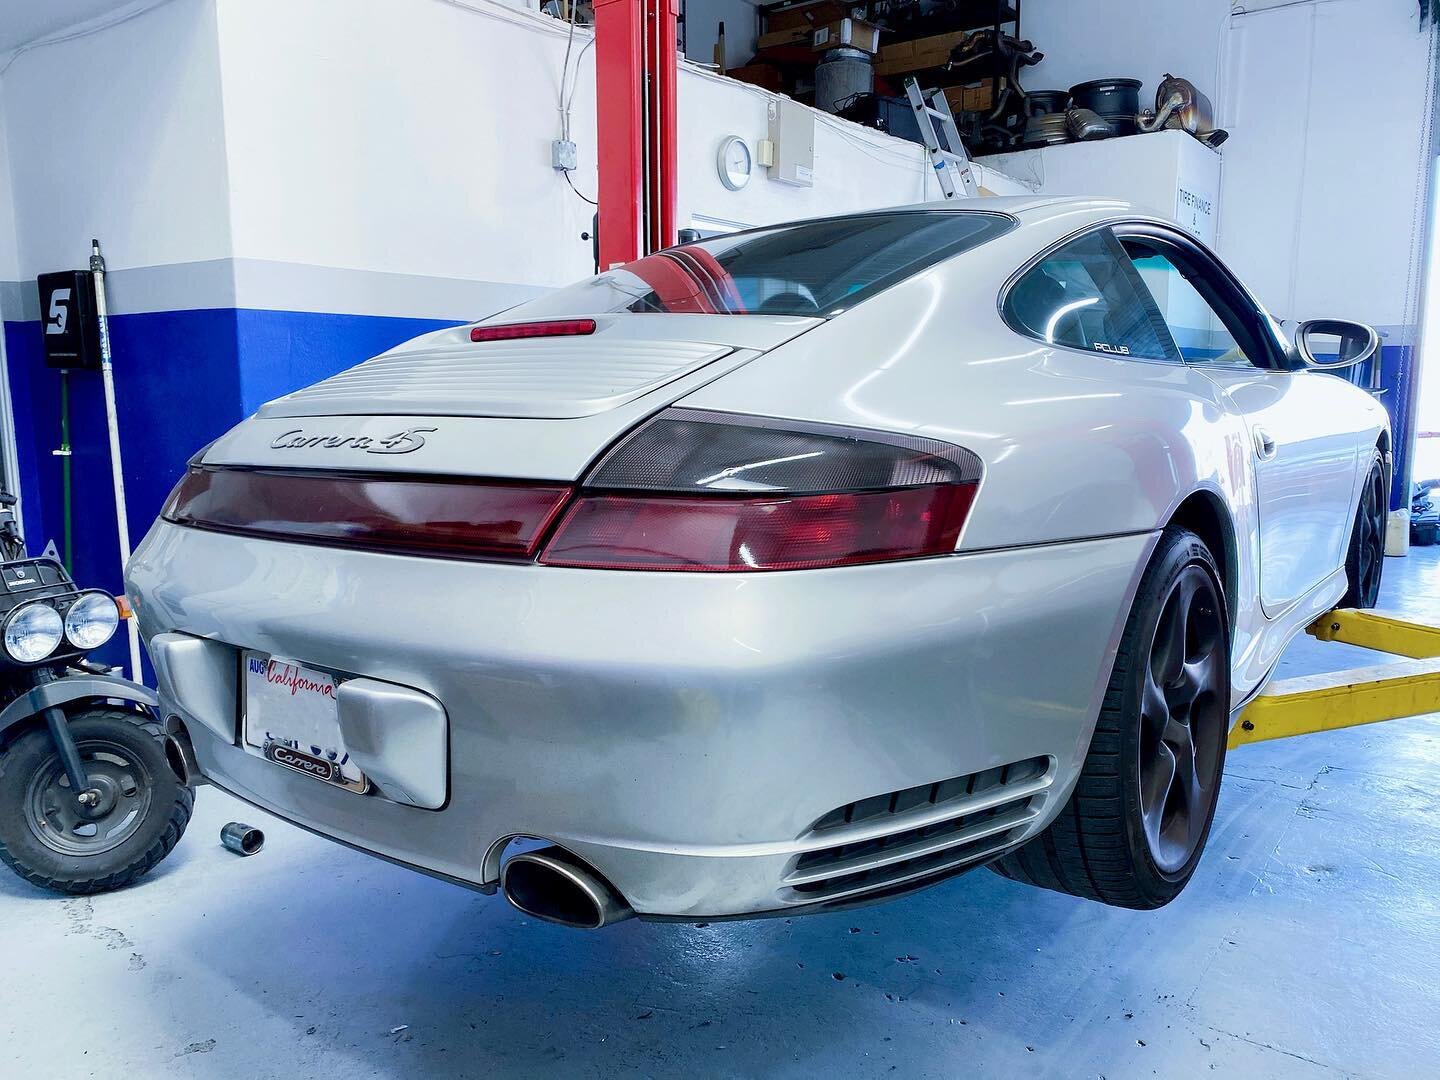 Repairs for this gorgeous Porsche 911 Carrera 4s so it can go back out onto the track! 
- R&amp;R oil separator, cam plugs and brake light switch.
.
.
.
#porsche #porsche911 #porscheclub #pclub #911carrera4s #carrera4s #996 #eurocode #eurocars #germa